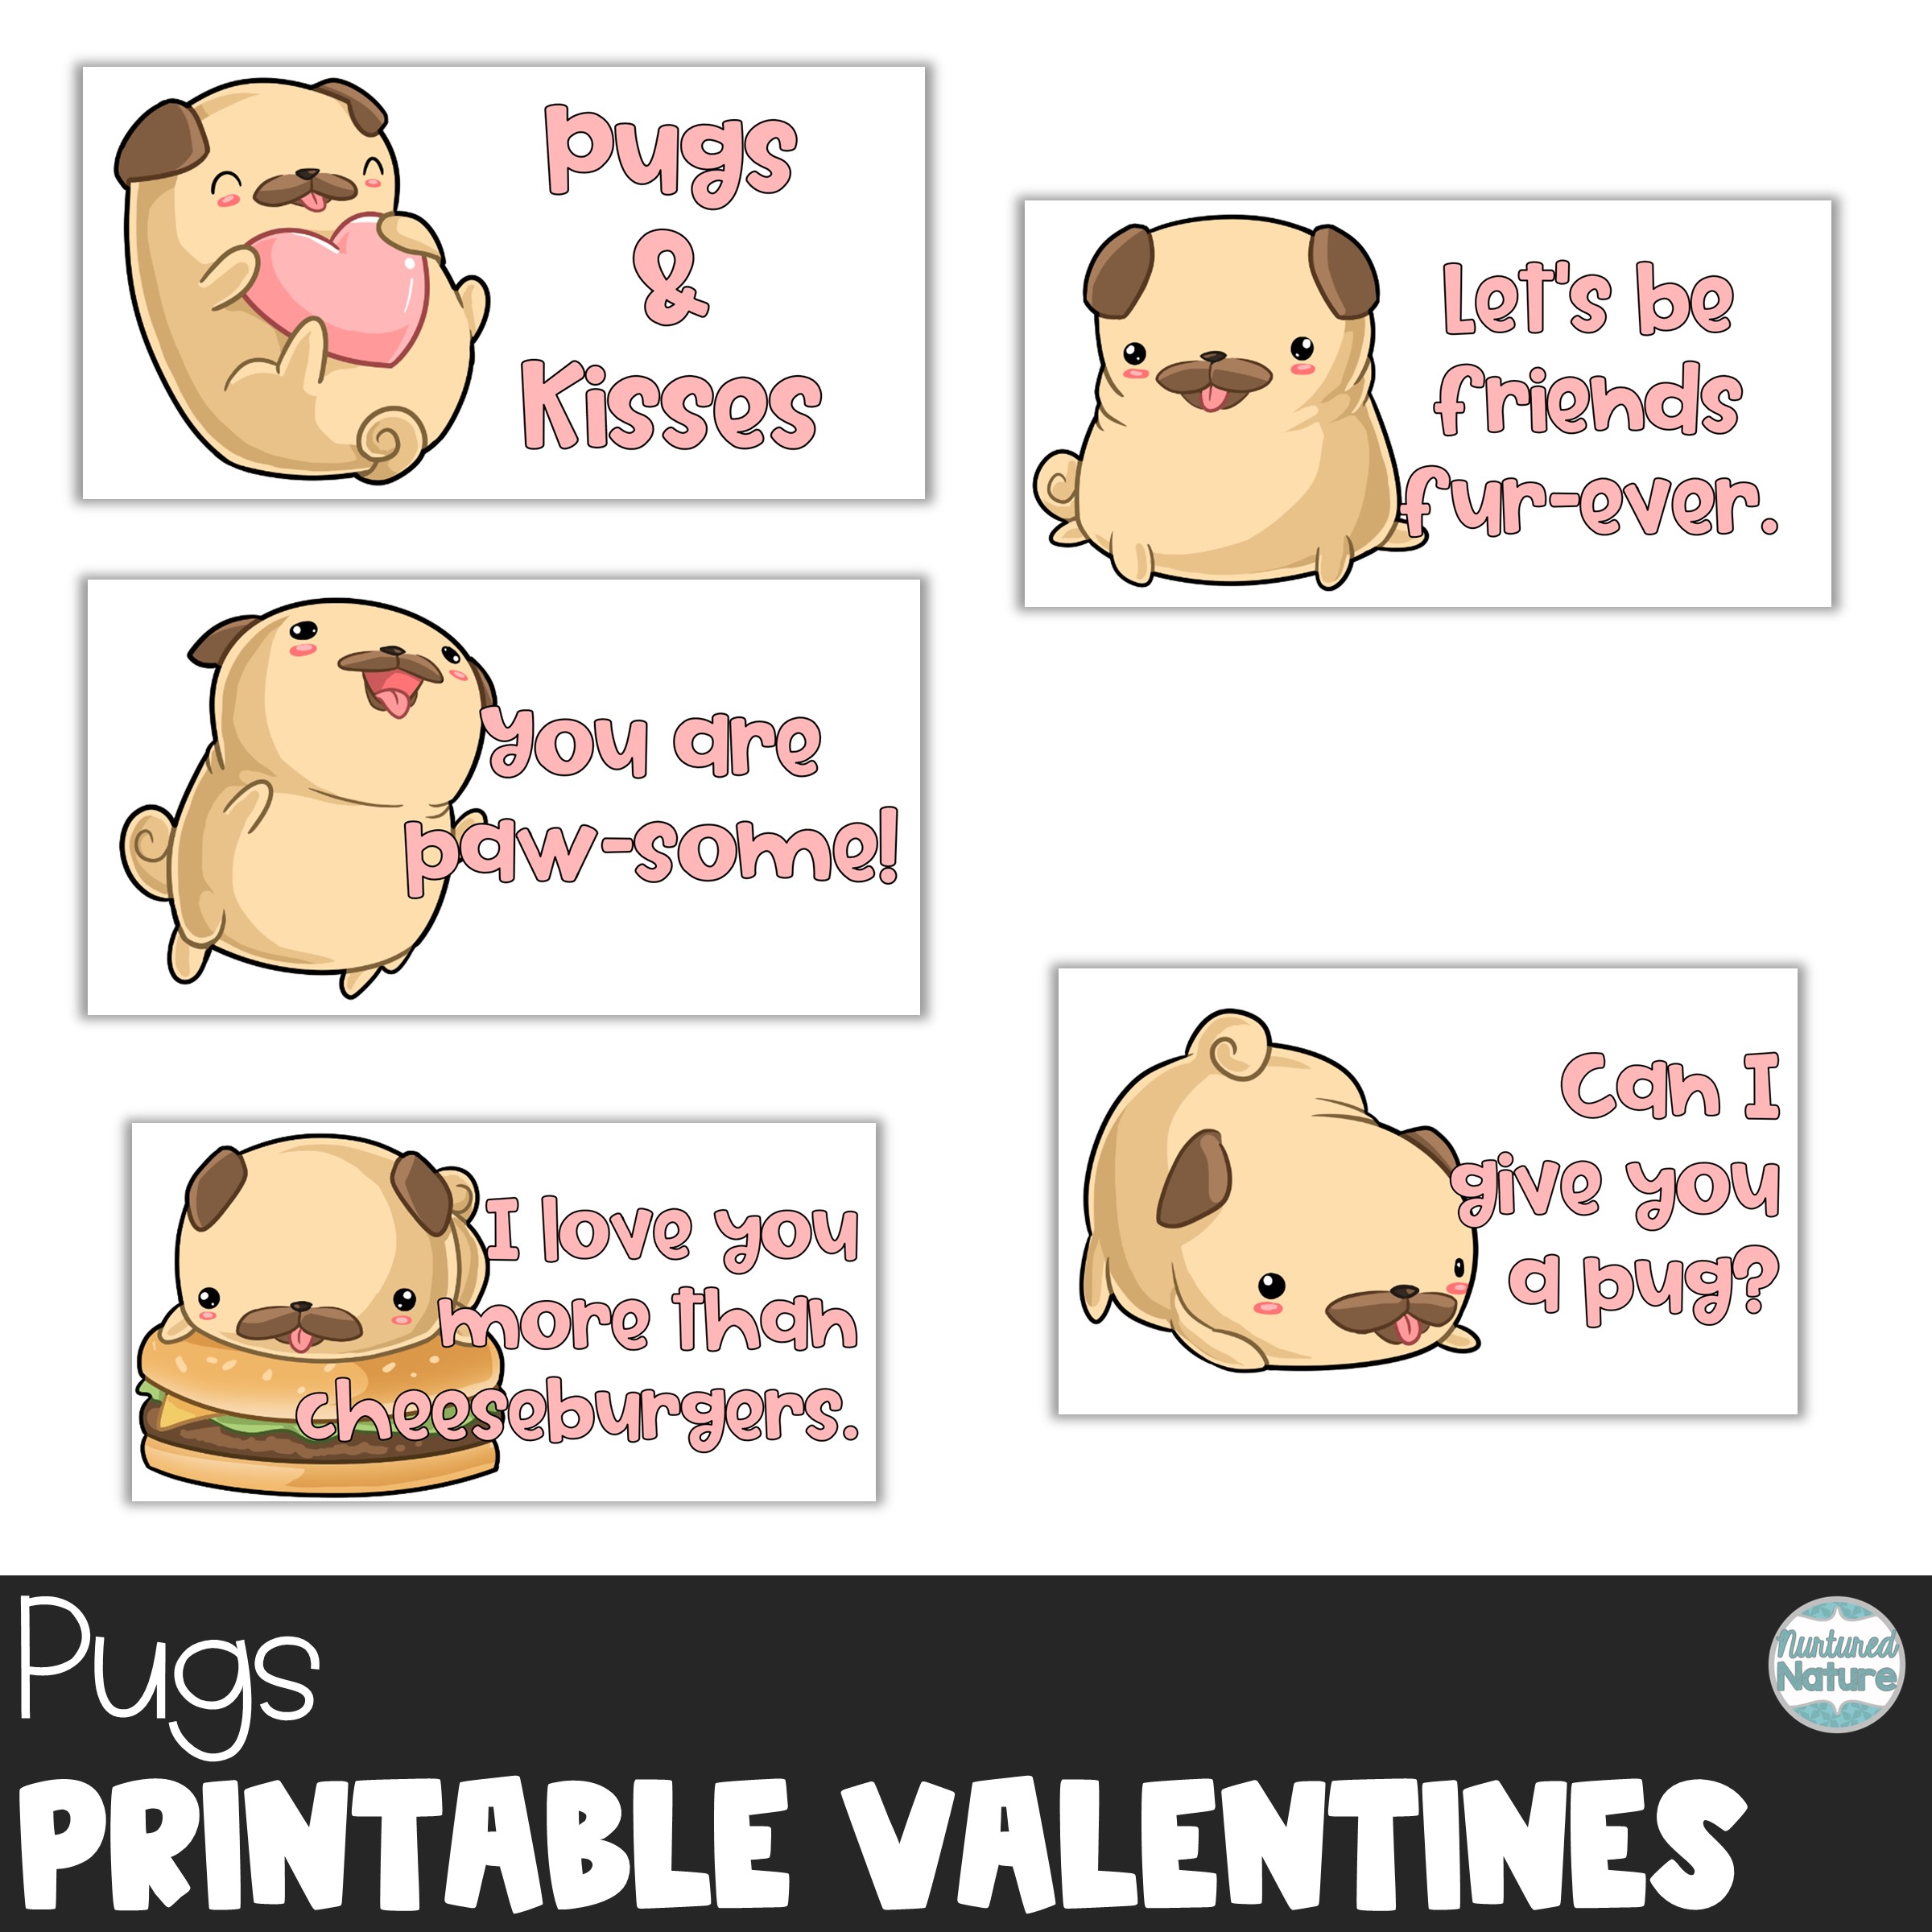 pug-printable-valentines-dog-valentine-s-day-cards-for-students-class